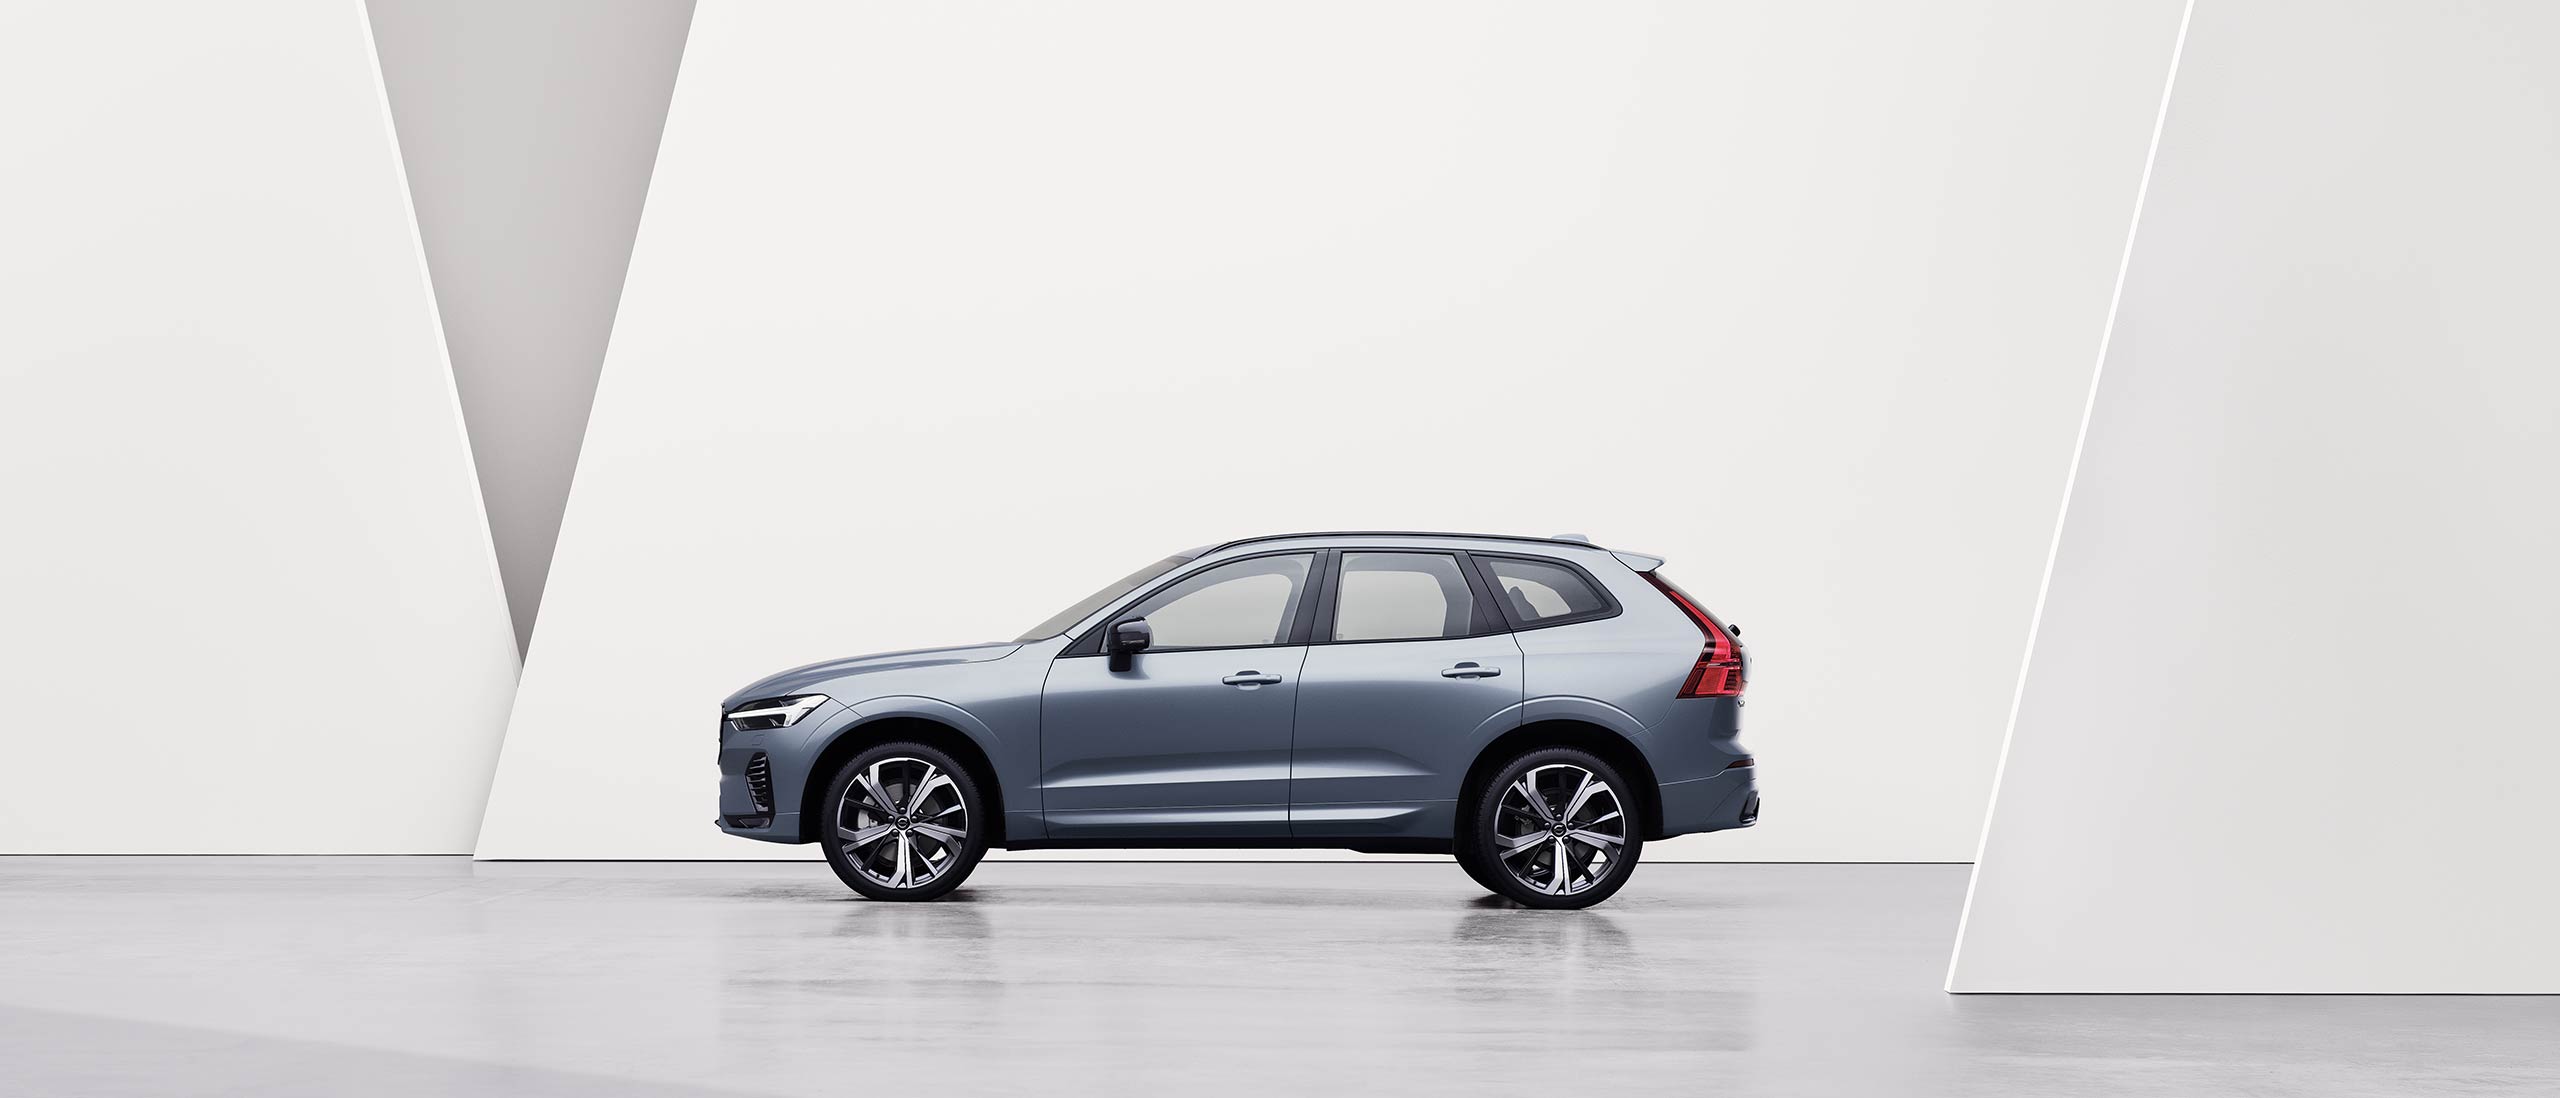 A silver Volvo XC60 standing still in front of a rock wall.